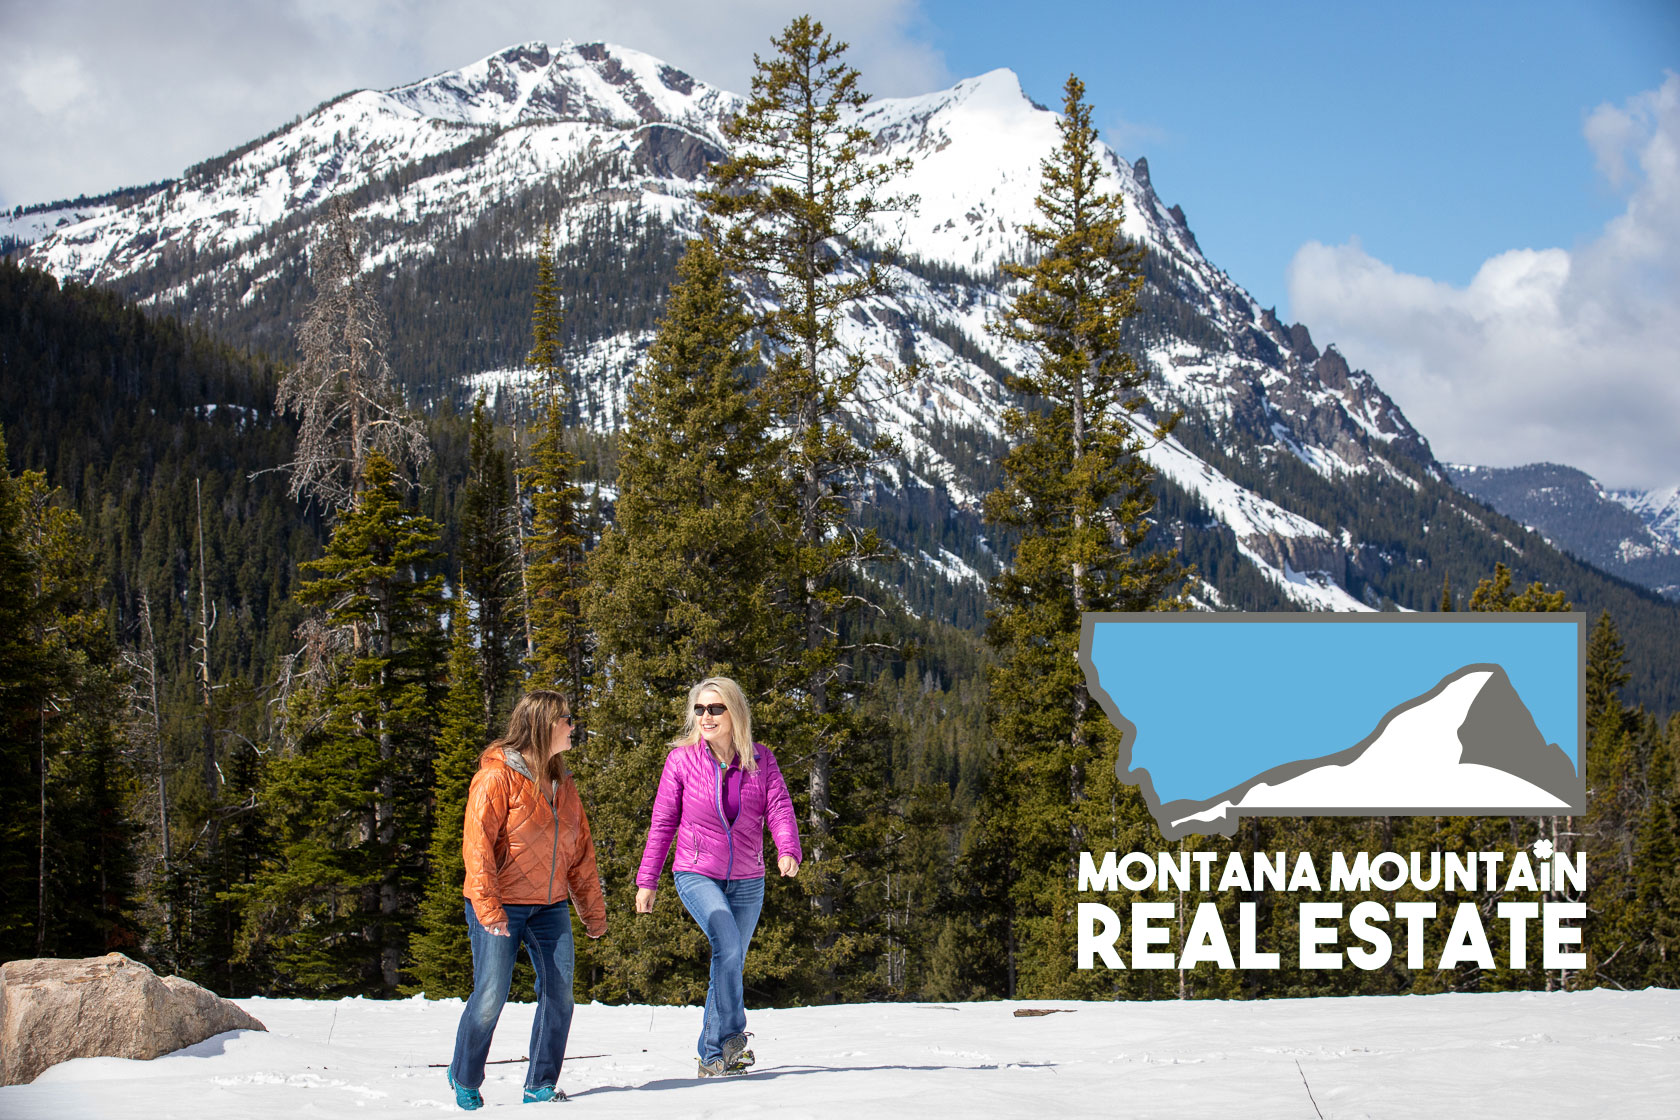 Montana Mountain Real Estate 23 Broadway Ave N STE 101, Red Lodge Montana 59068